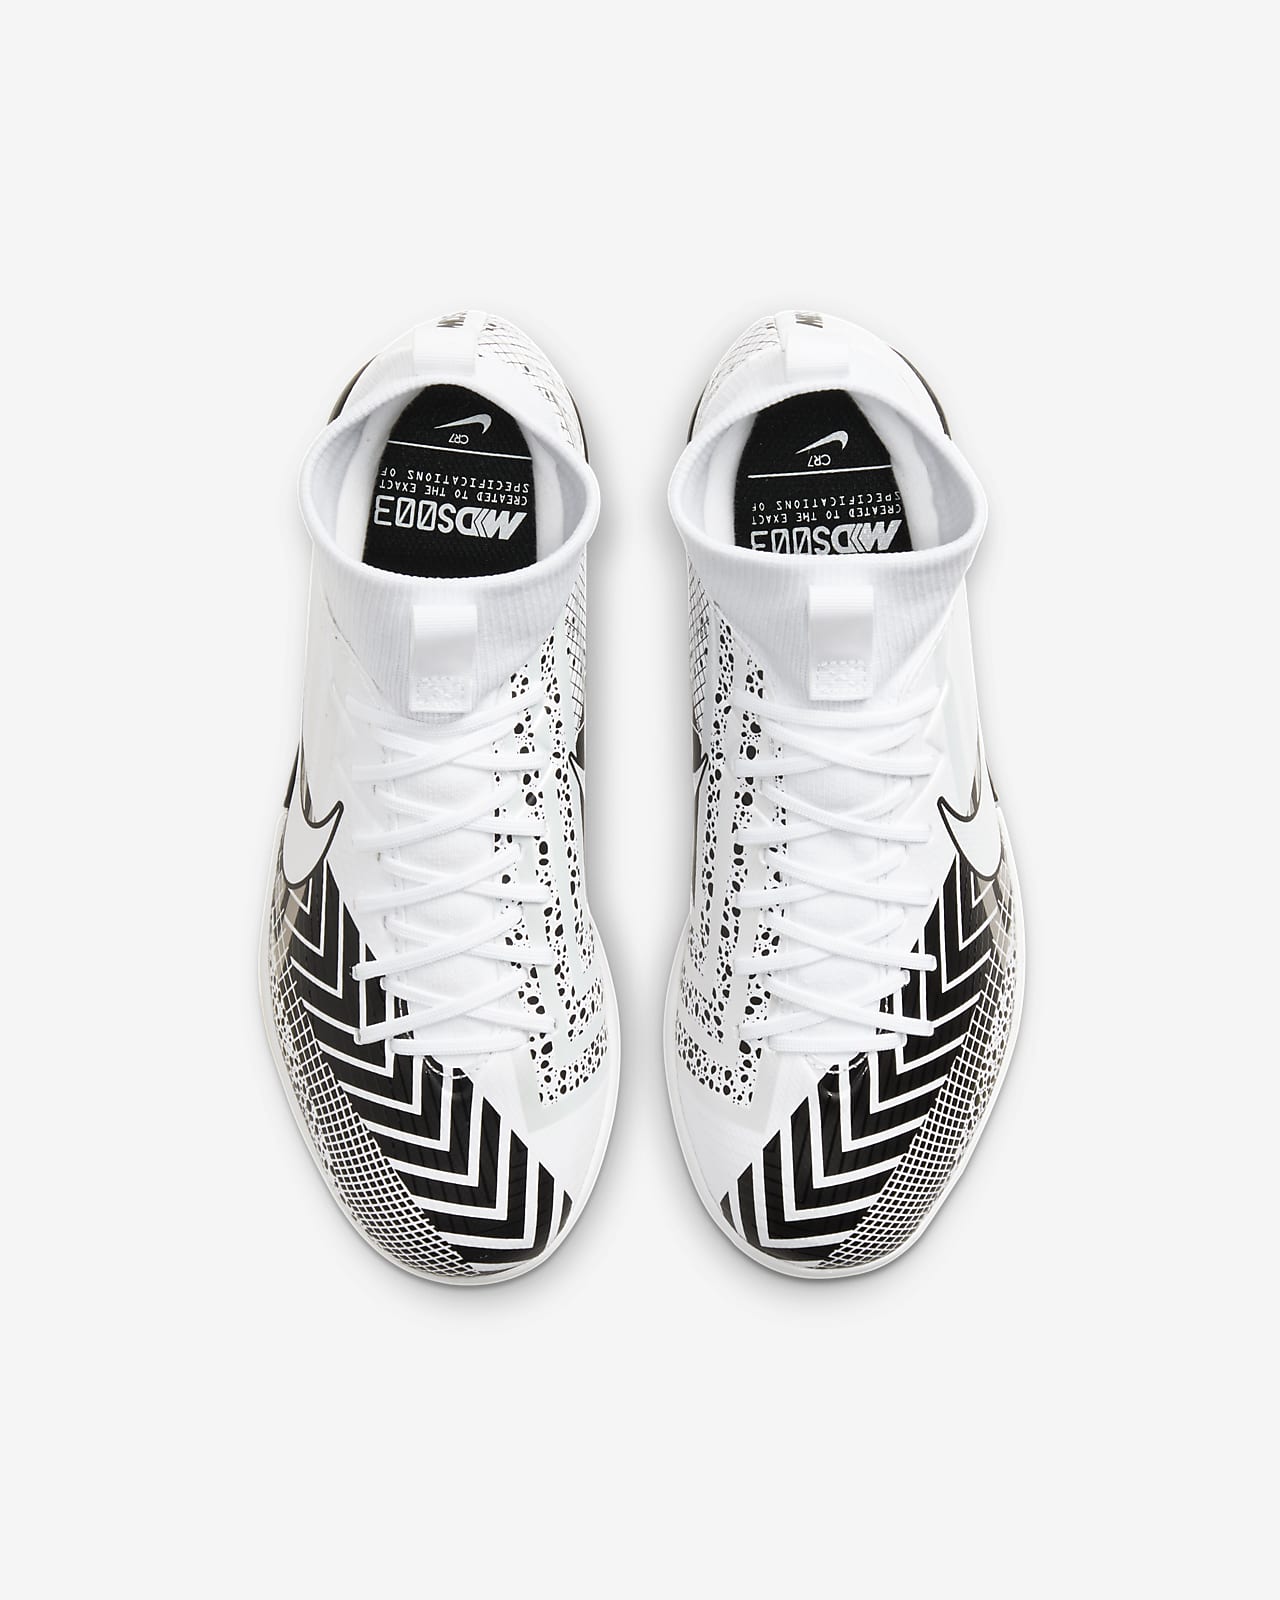 nike mercurial superfly 7 academy indoor soccer shoes